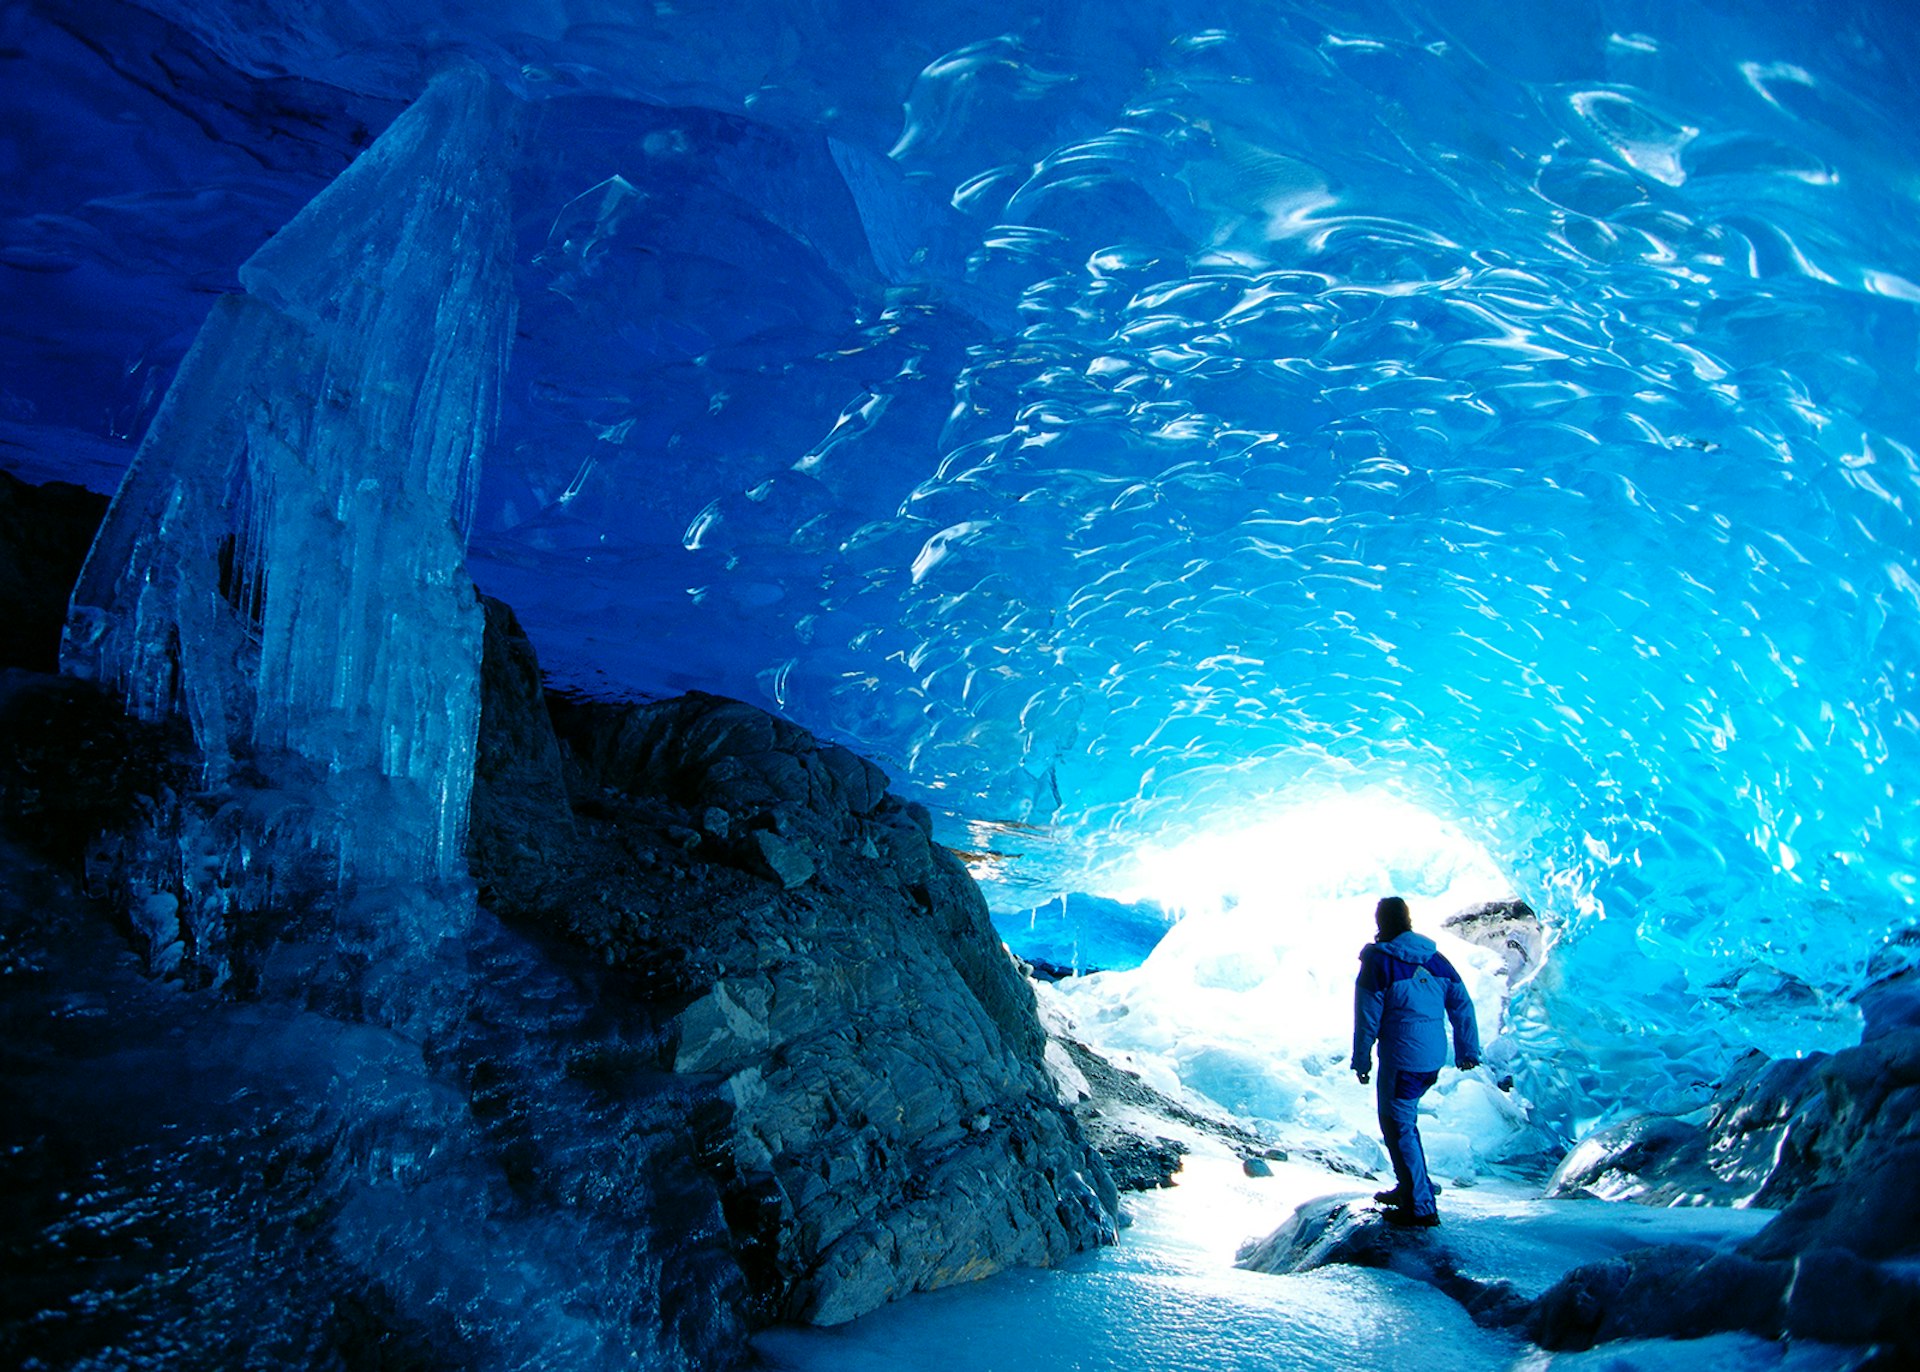 Shimmering blue ice in the caves beneath Alaska's Mendenhall Glacier © Hyde John / Getty Images